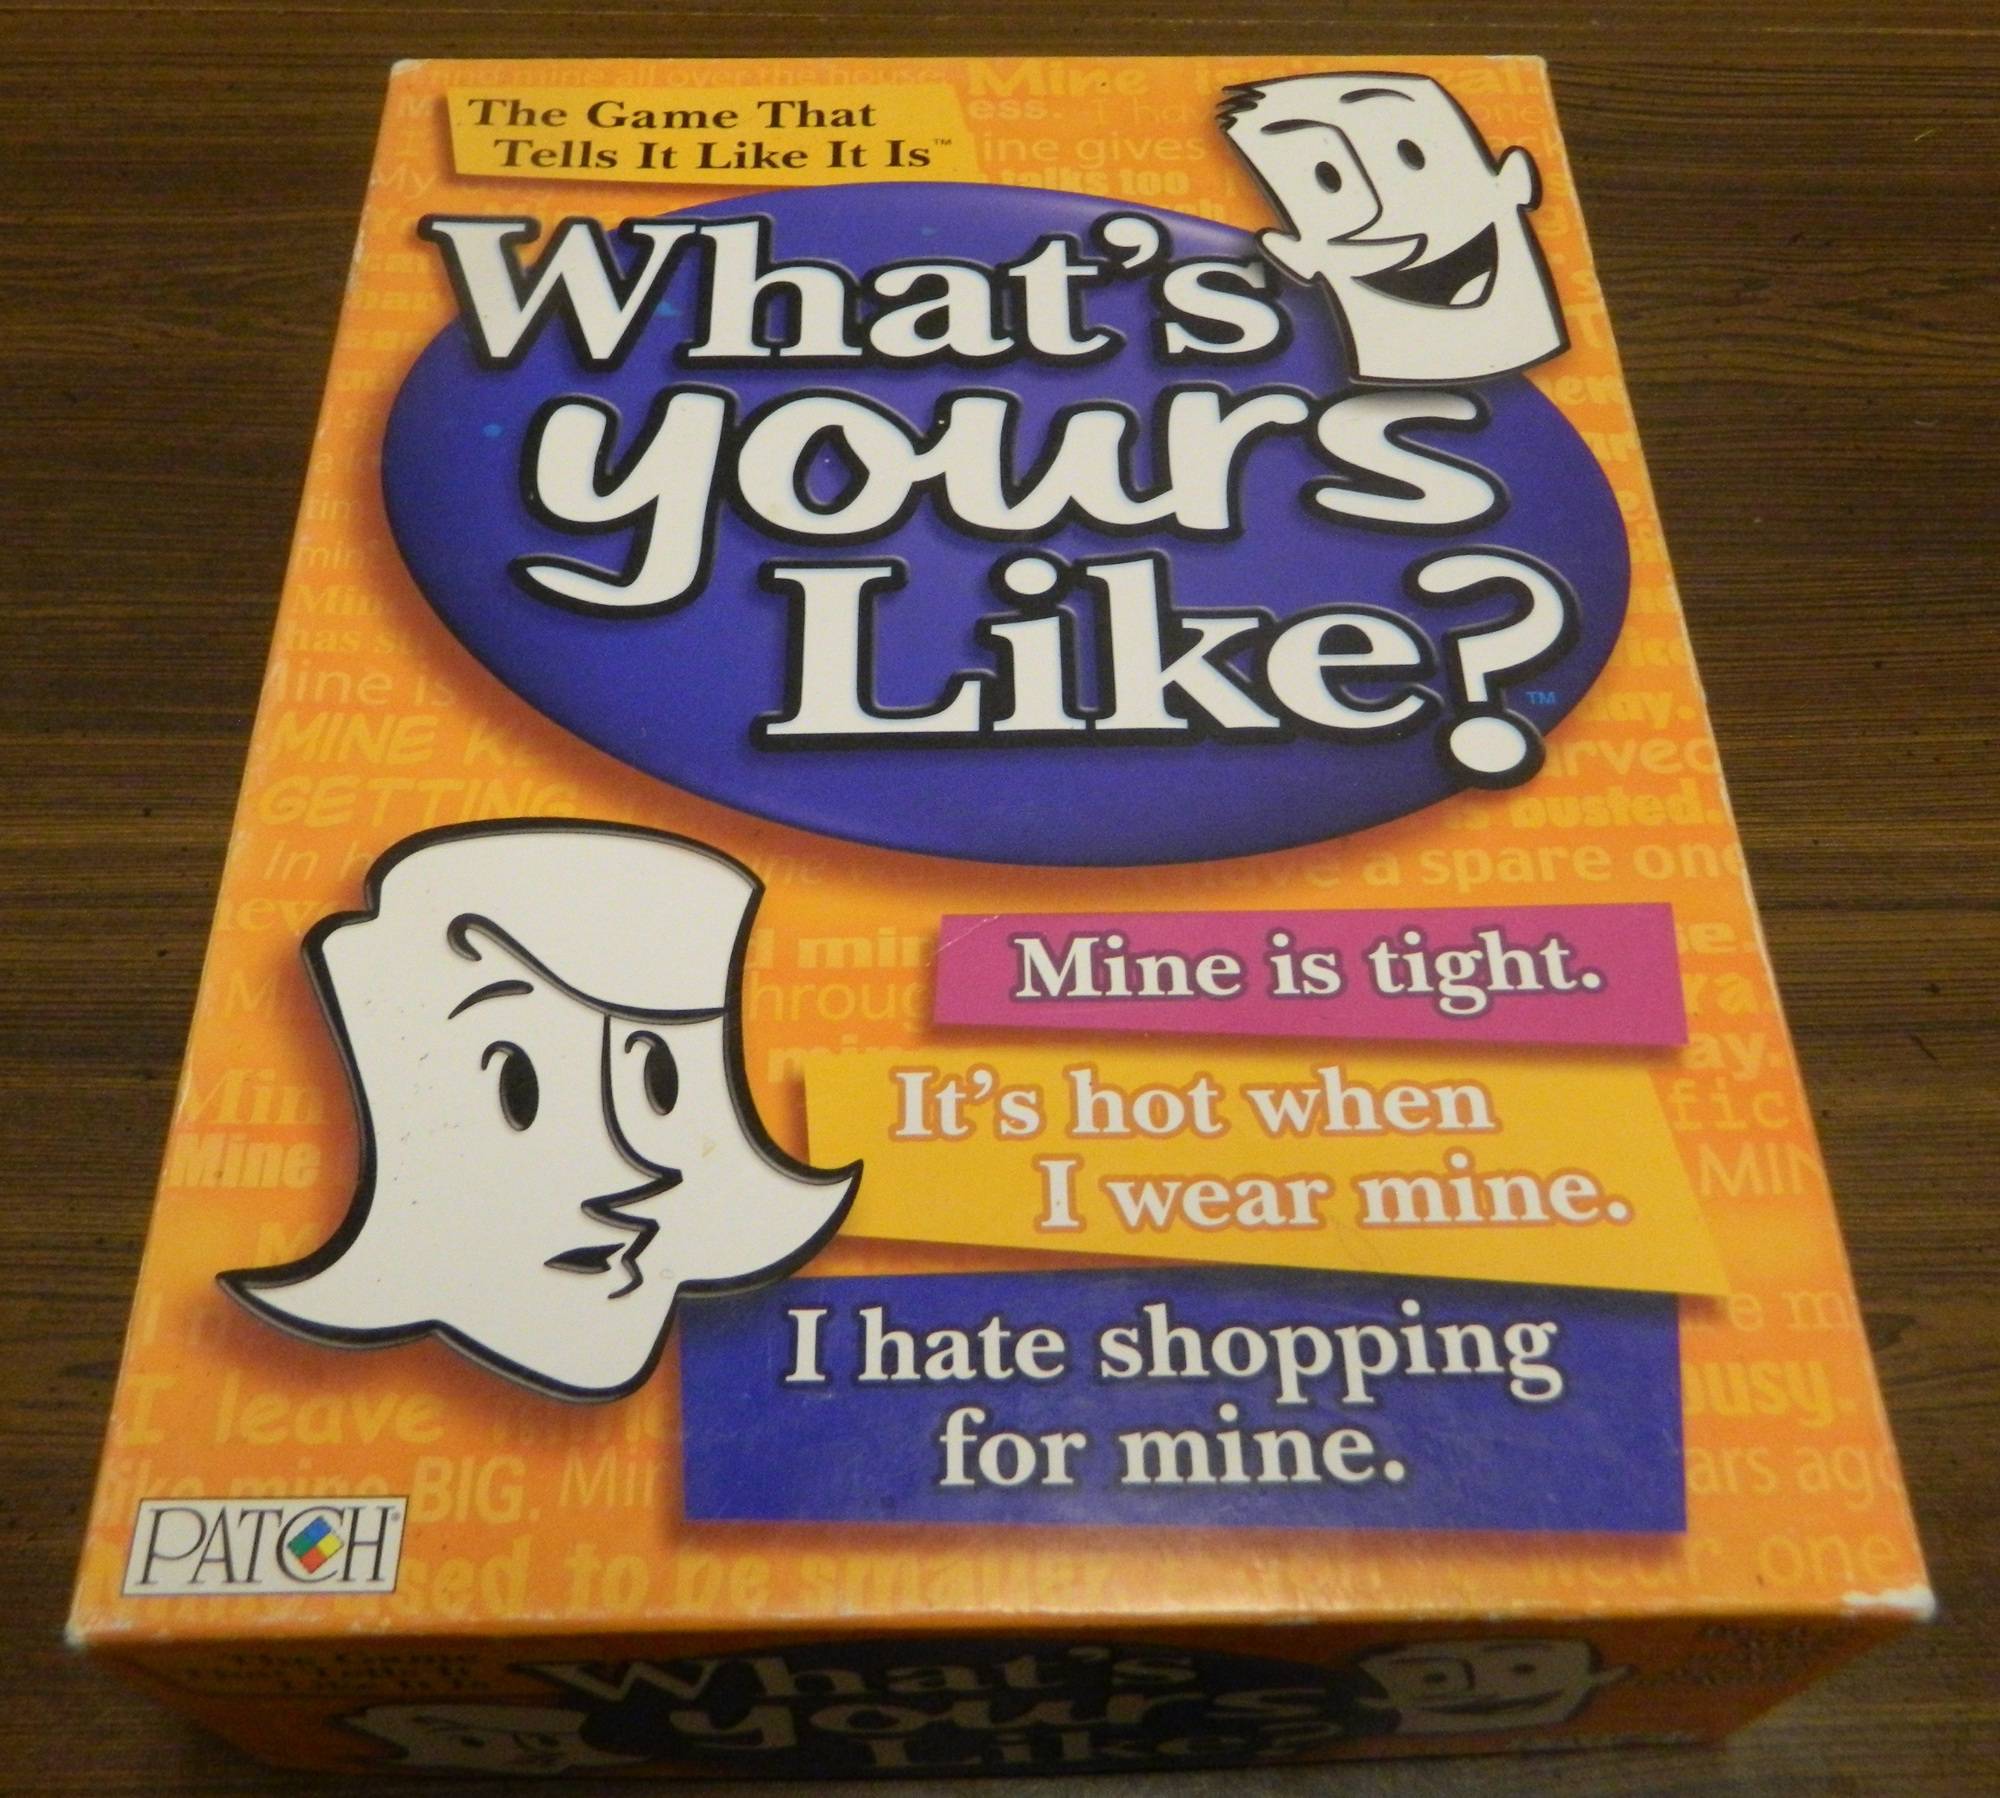 What’s Yours Like? Board Game Review and Rules